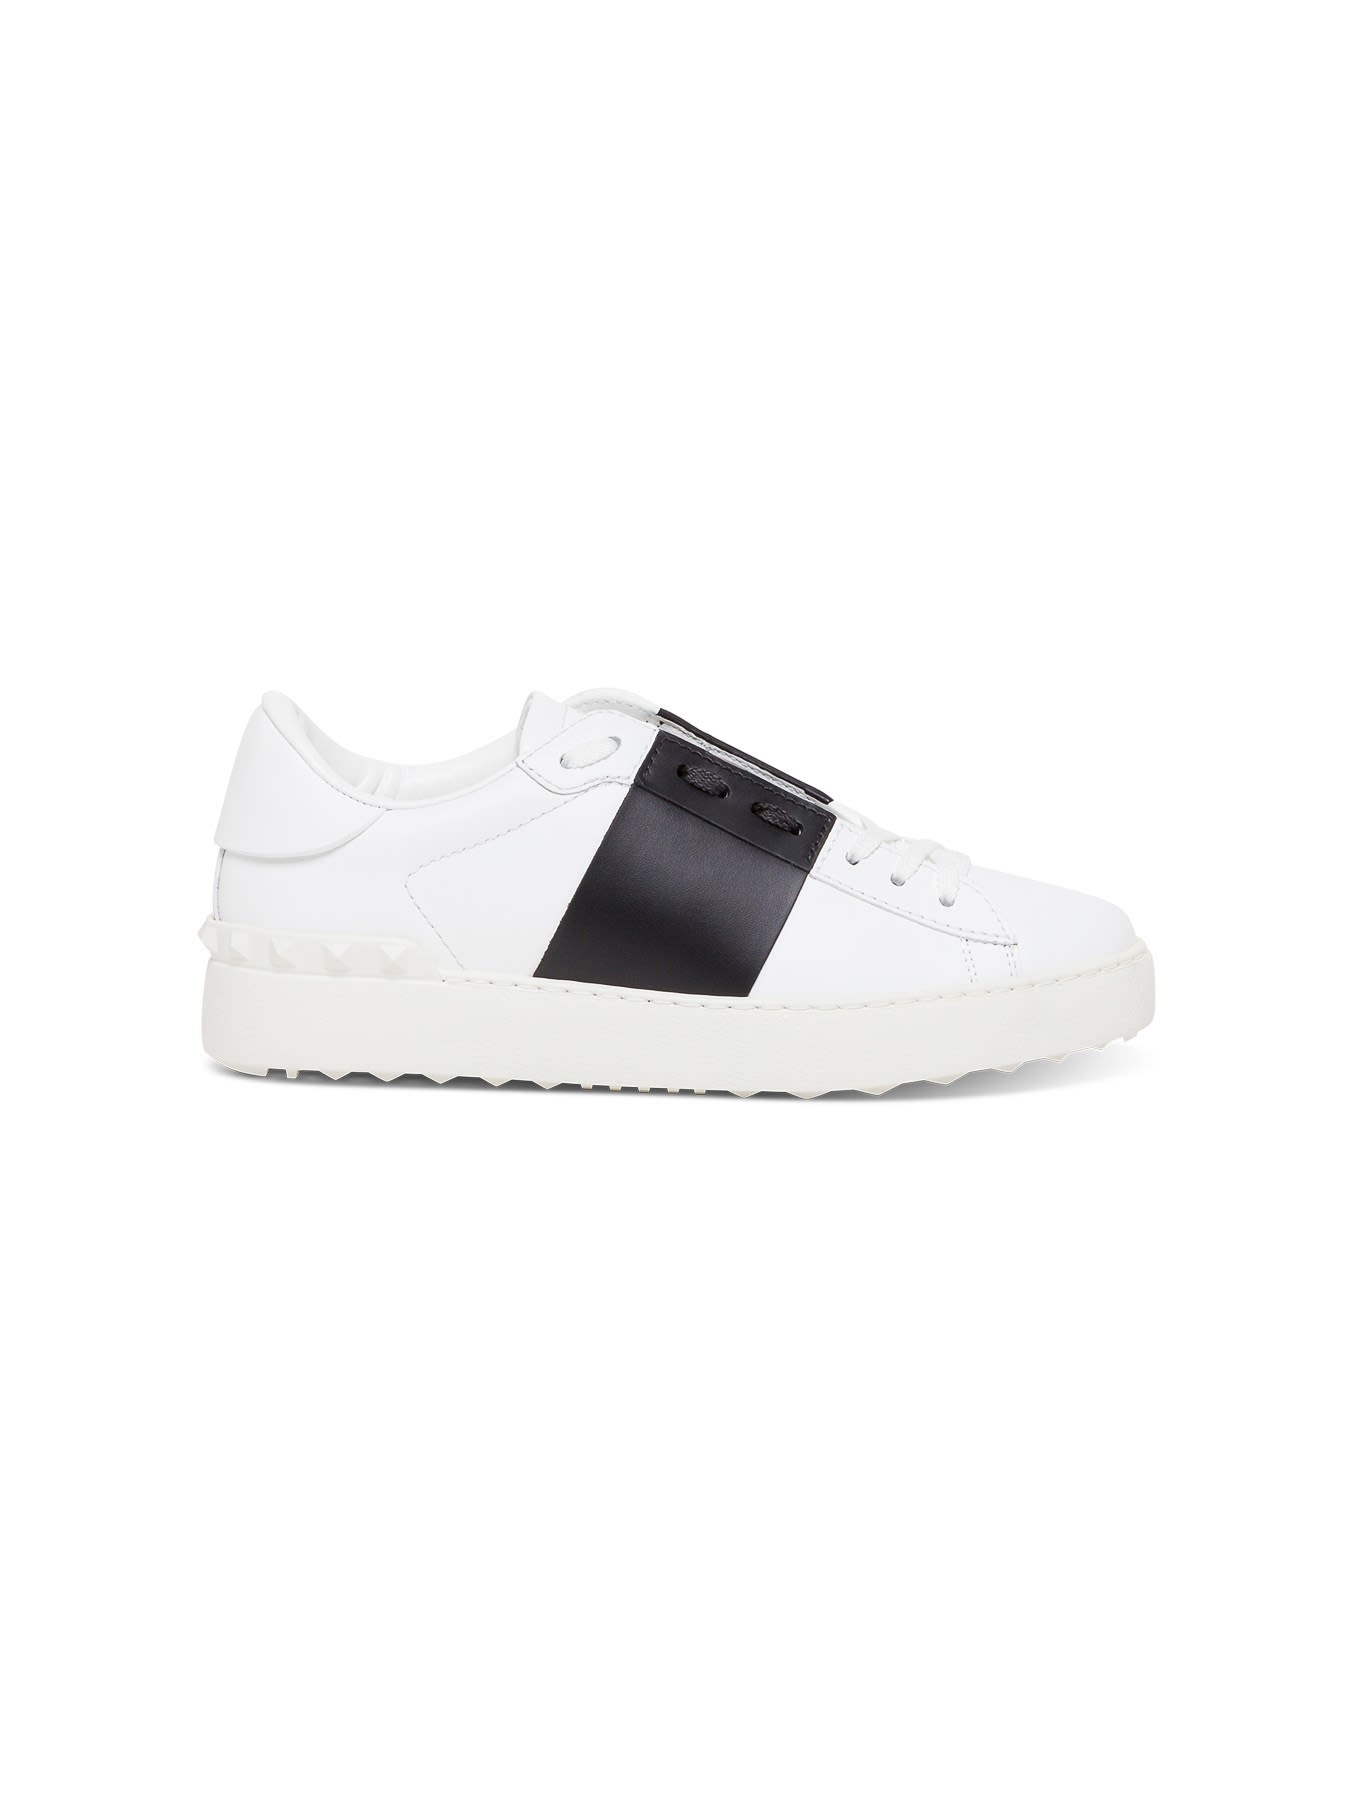 Buy Valentino Open Leather Sneakers online, shop Valentino shoes with free shipping